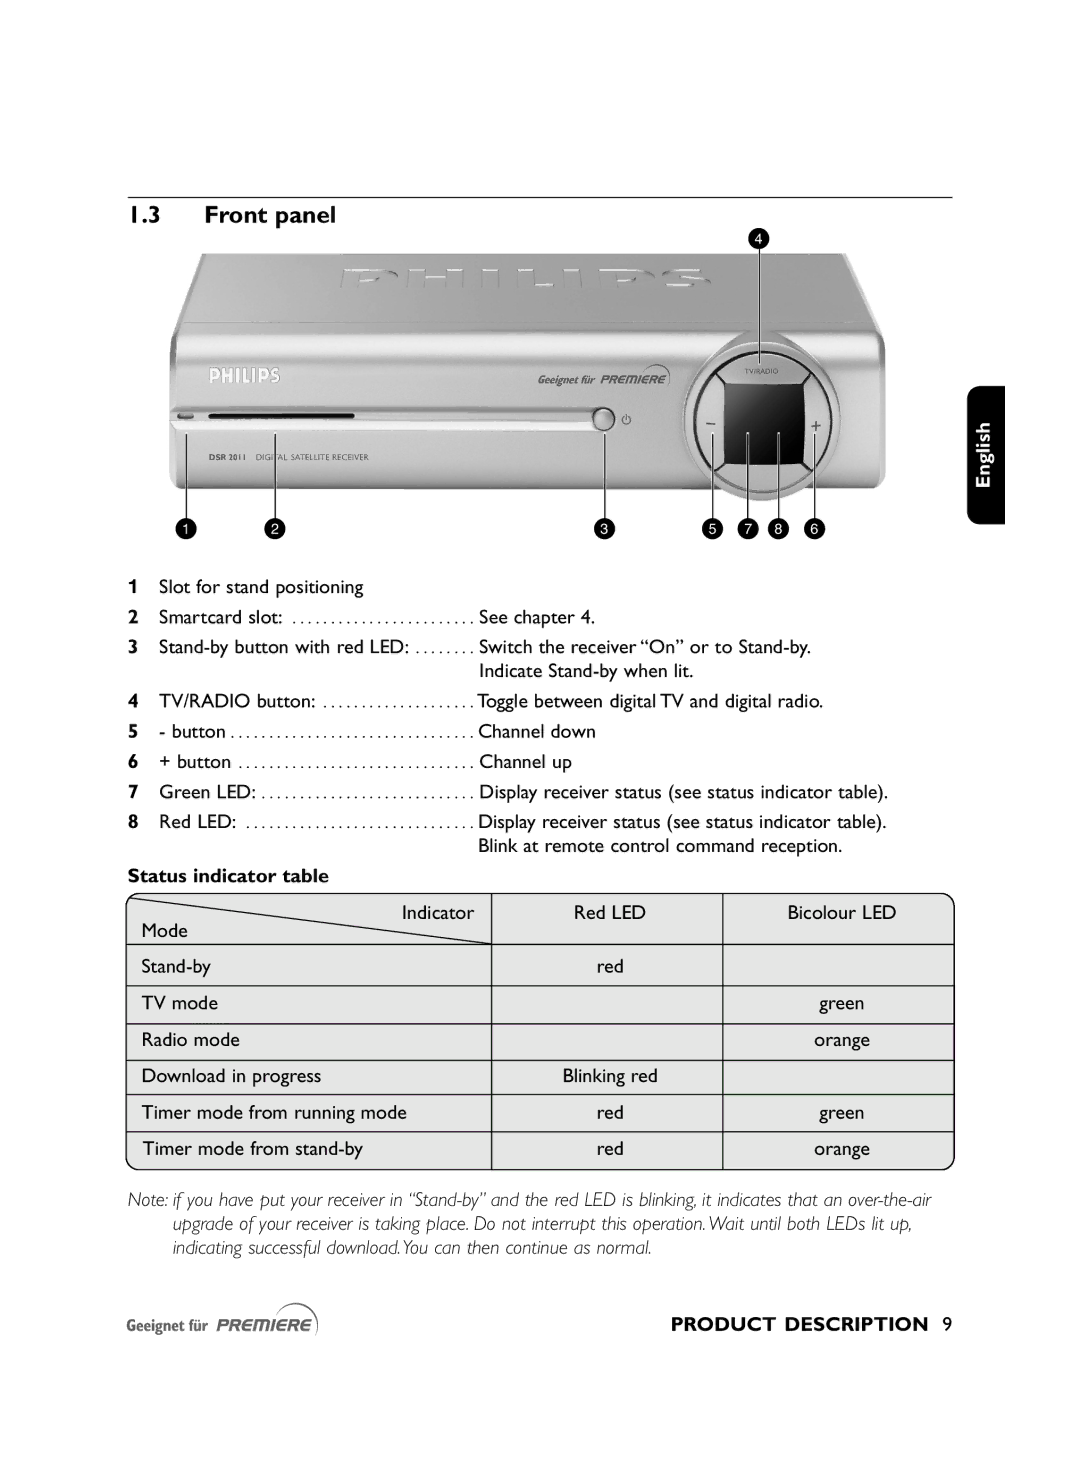 Philips DSR2010 manual Front panel, Status indicator table 